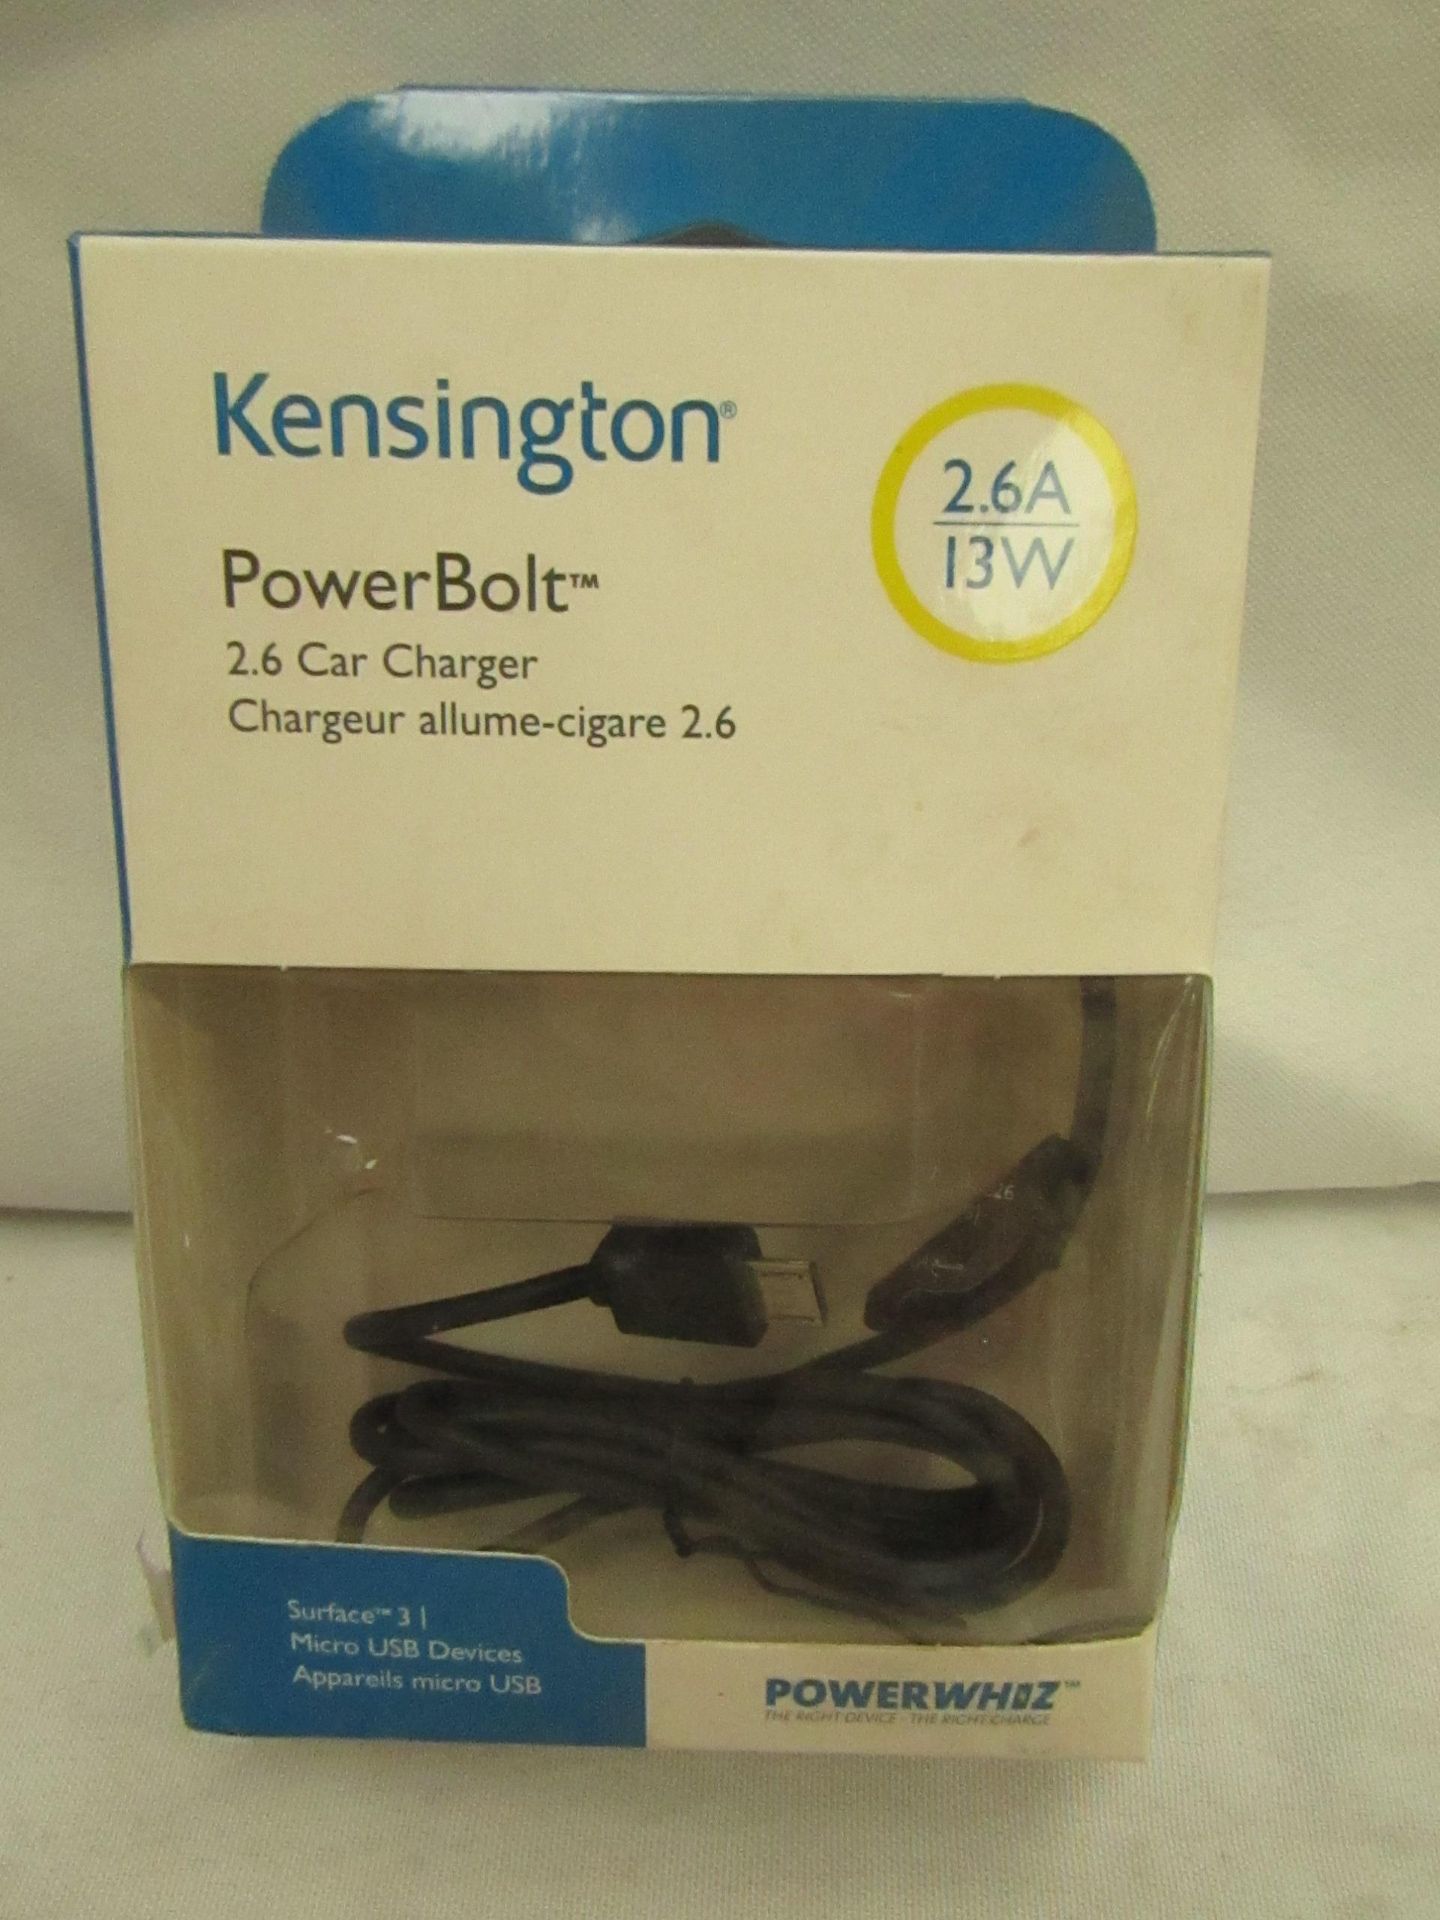 5x Kensington PowerBolt 2.6 13w Car Charger (made for Surface 3) with 3ft Cable  | New & Packaged.